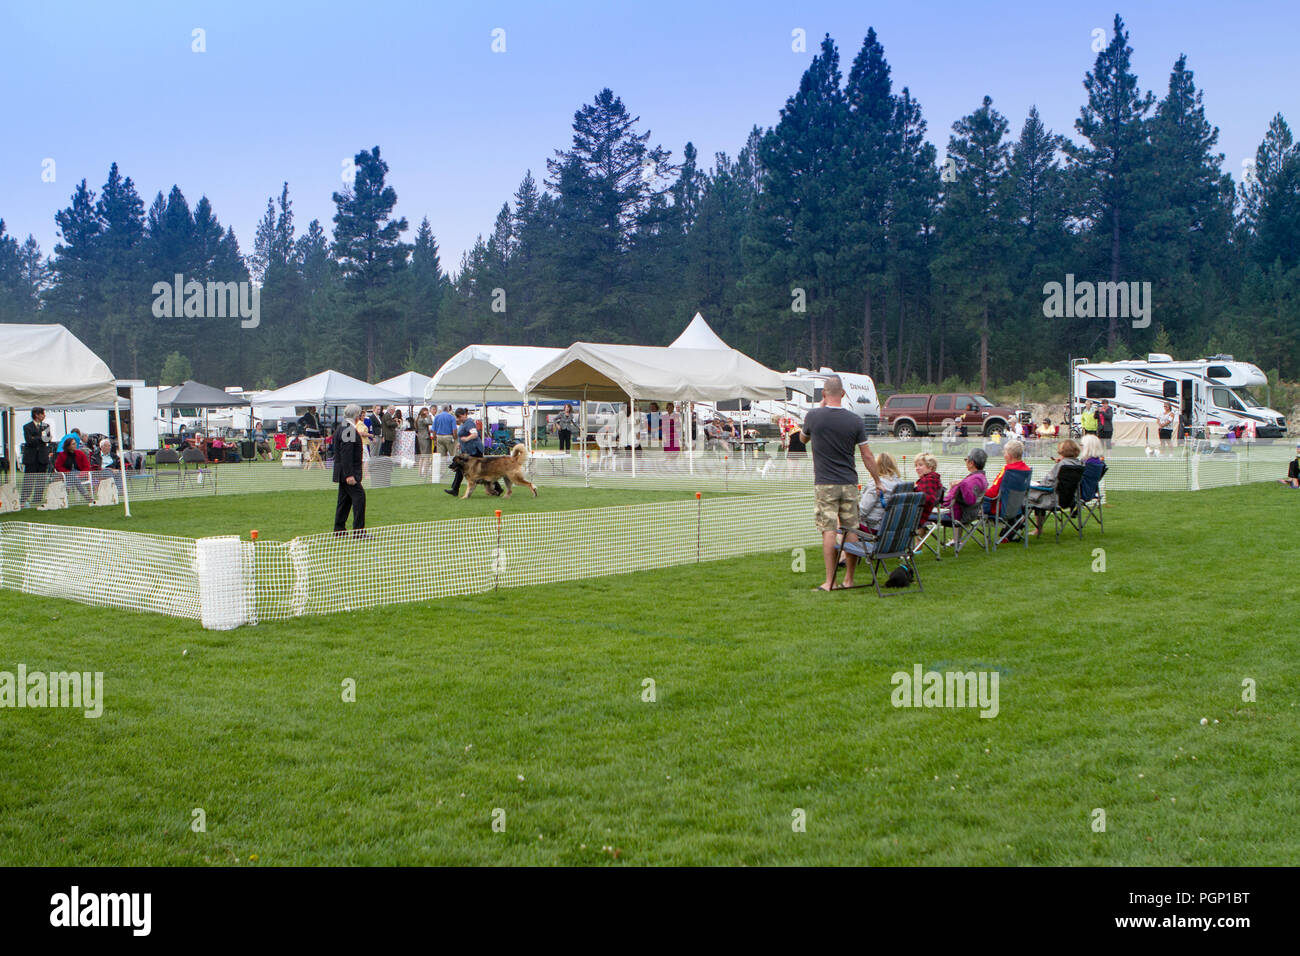 Cranbrook Annual Dog Show, showing ring, vendor tents, veiw of the entire set up Stock Photo